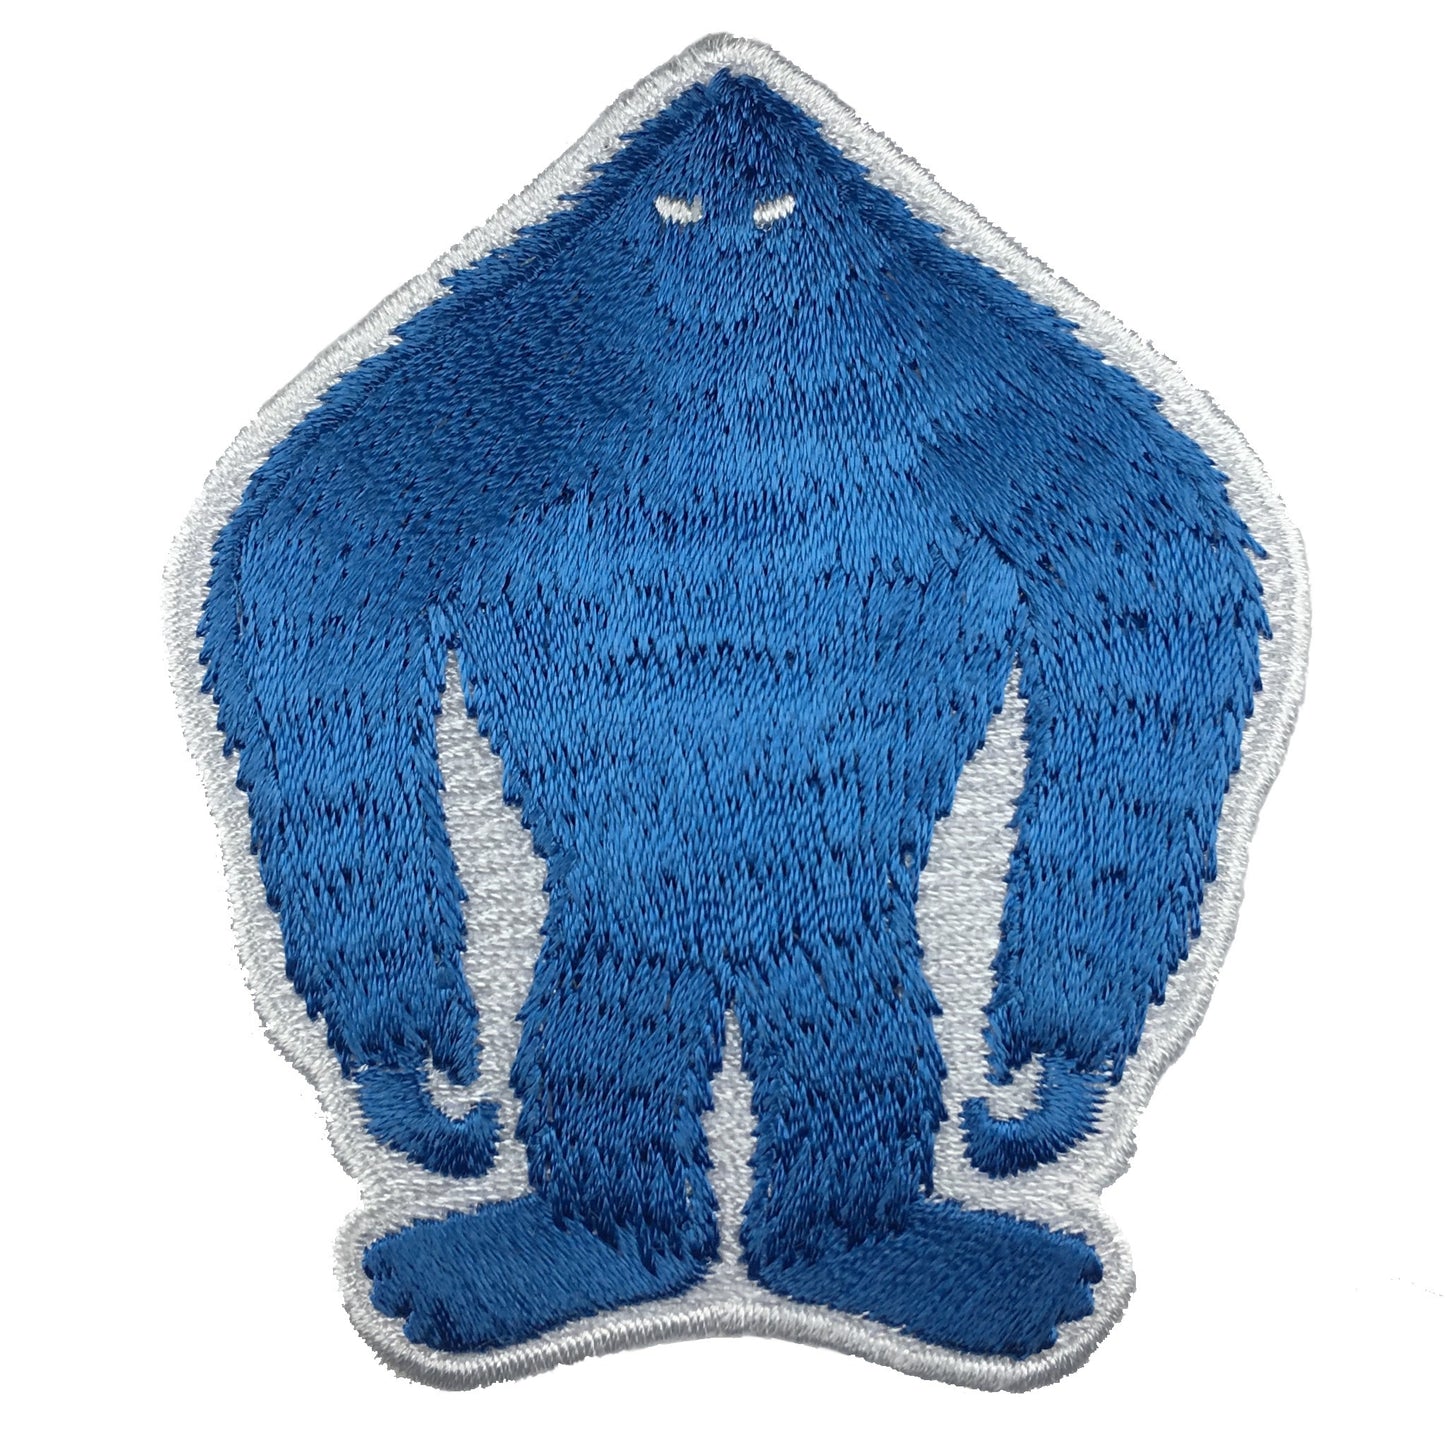 Yeti cryptid silhouette embroidered patch 